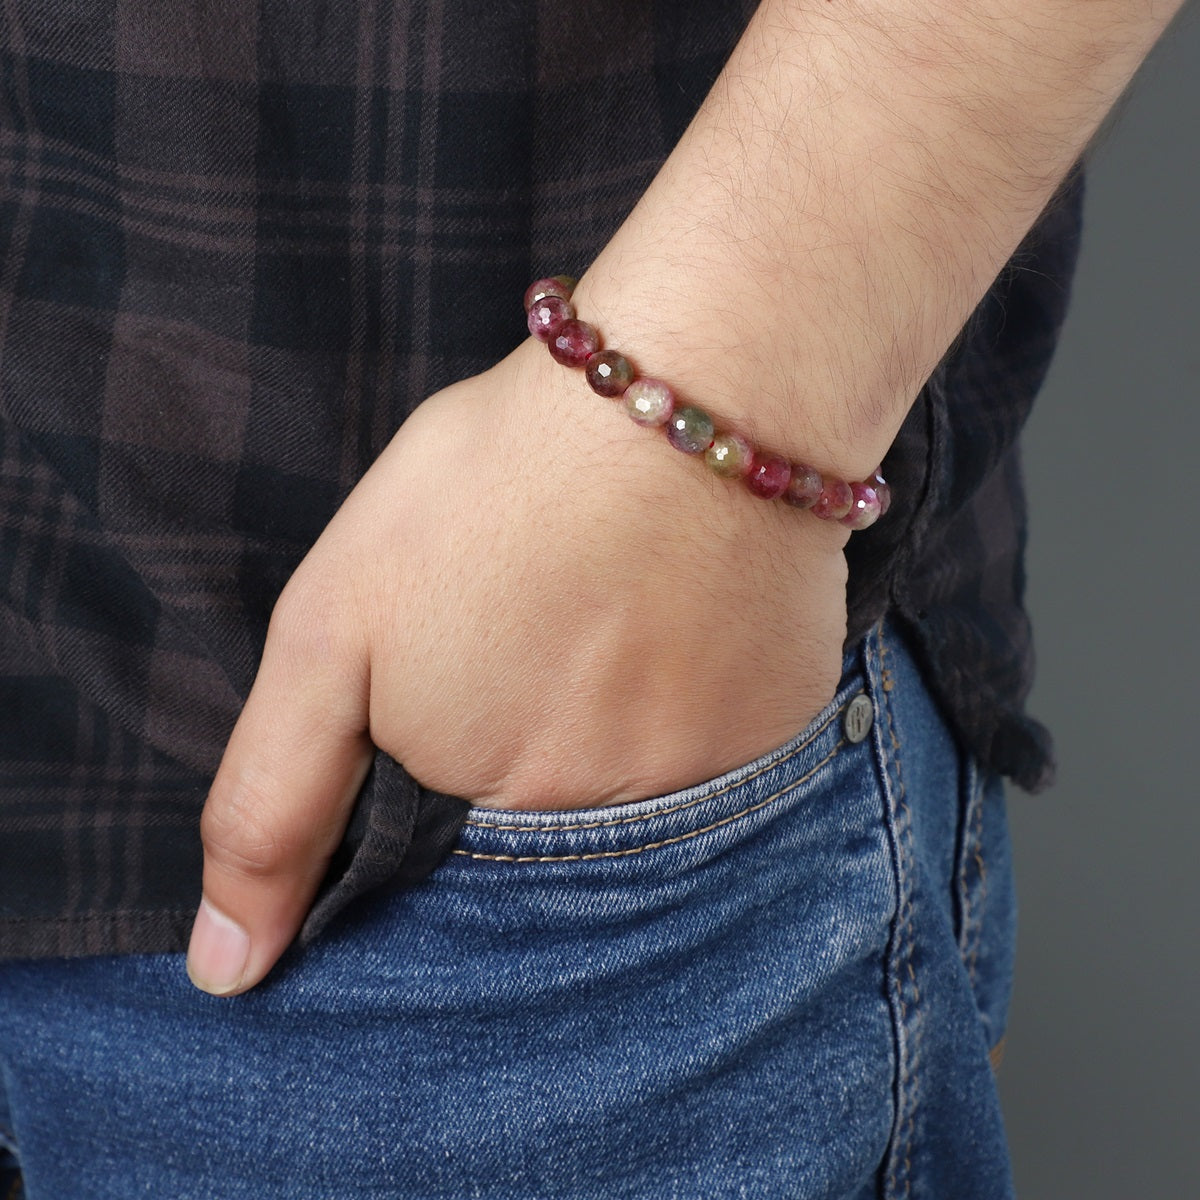 Stylish and versatile Red Quartz Bracelet, a fashionable accessory that blends passion with practical elegance.